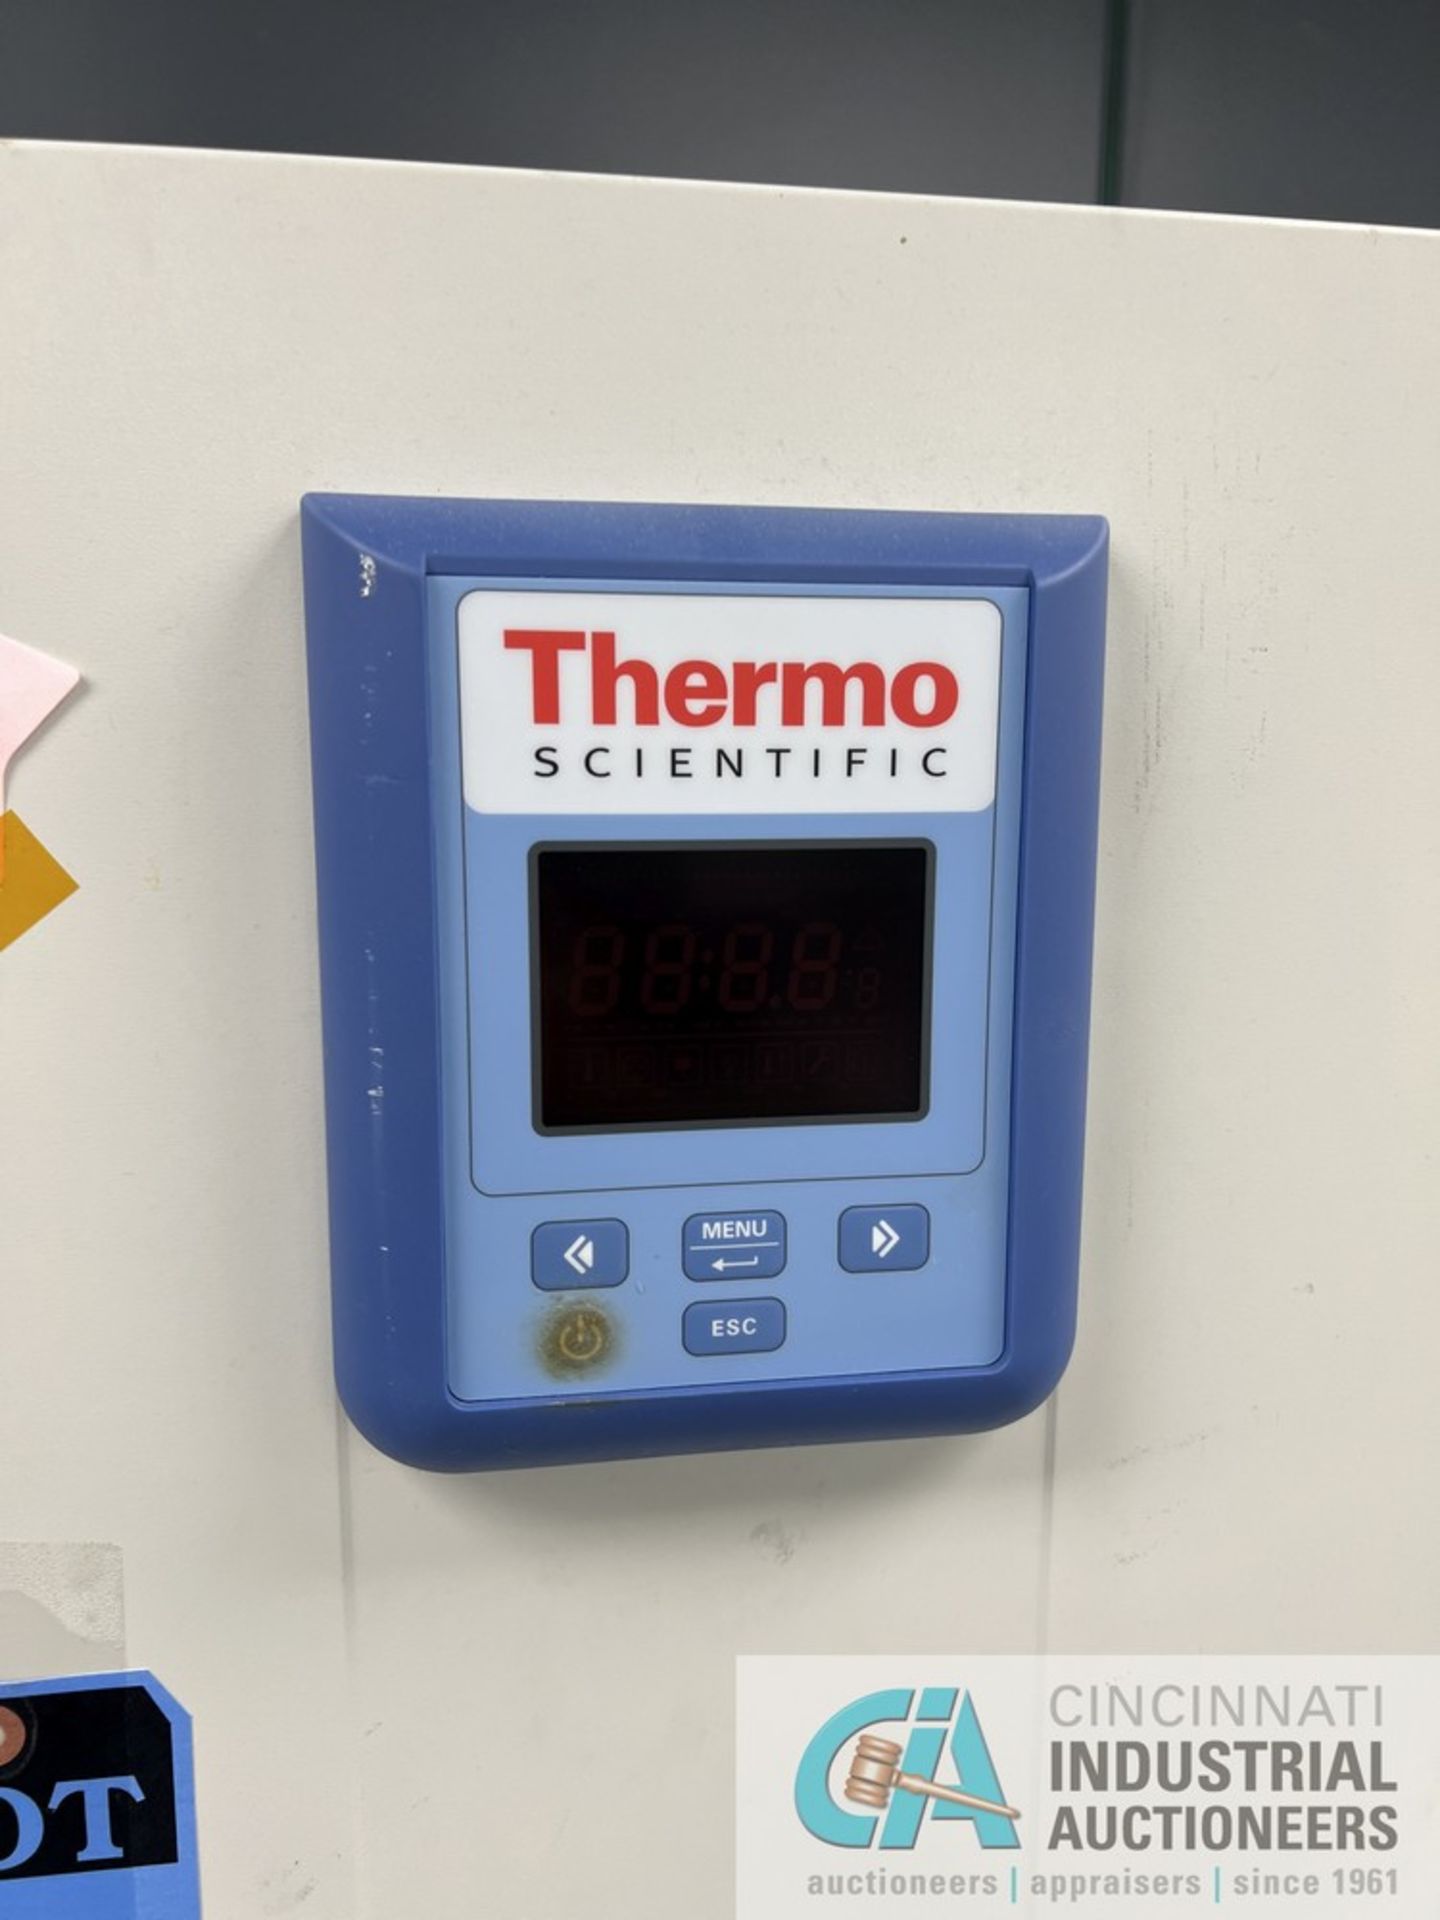 THERMO SCIENTIFIC MODEL HERATHERM OMS180 INDUSTRIAL OVEN; S/N 42473604, 20" X 20" X 28" CHAMBER ( - Image 2 of 4